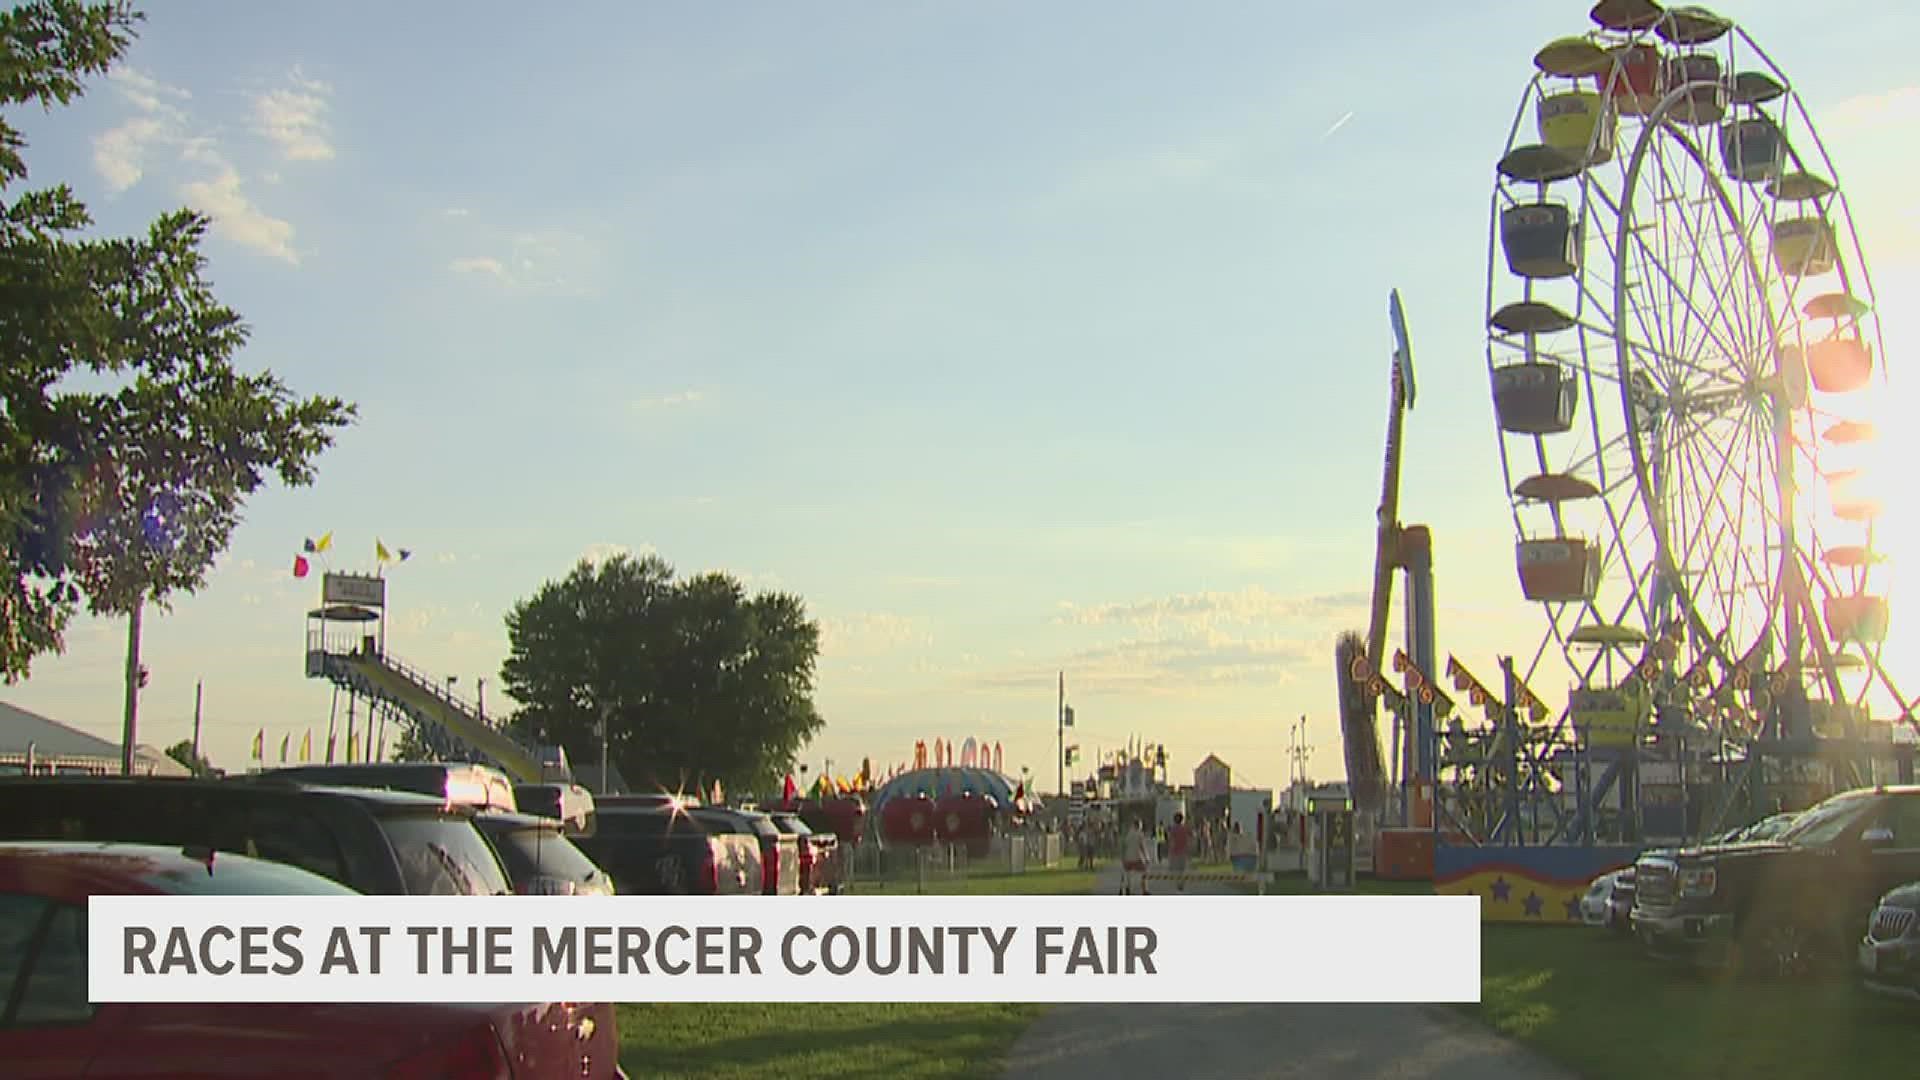 Racing action was underway in the early days of the Mercer County Fair before the big demolition derby on Saturday